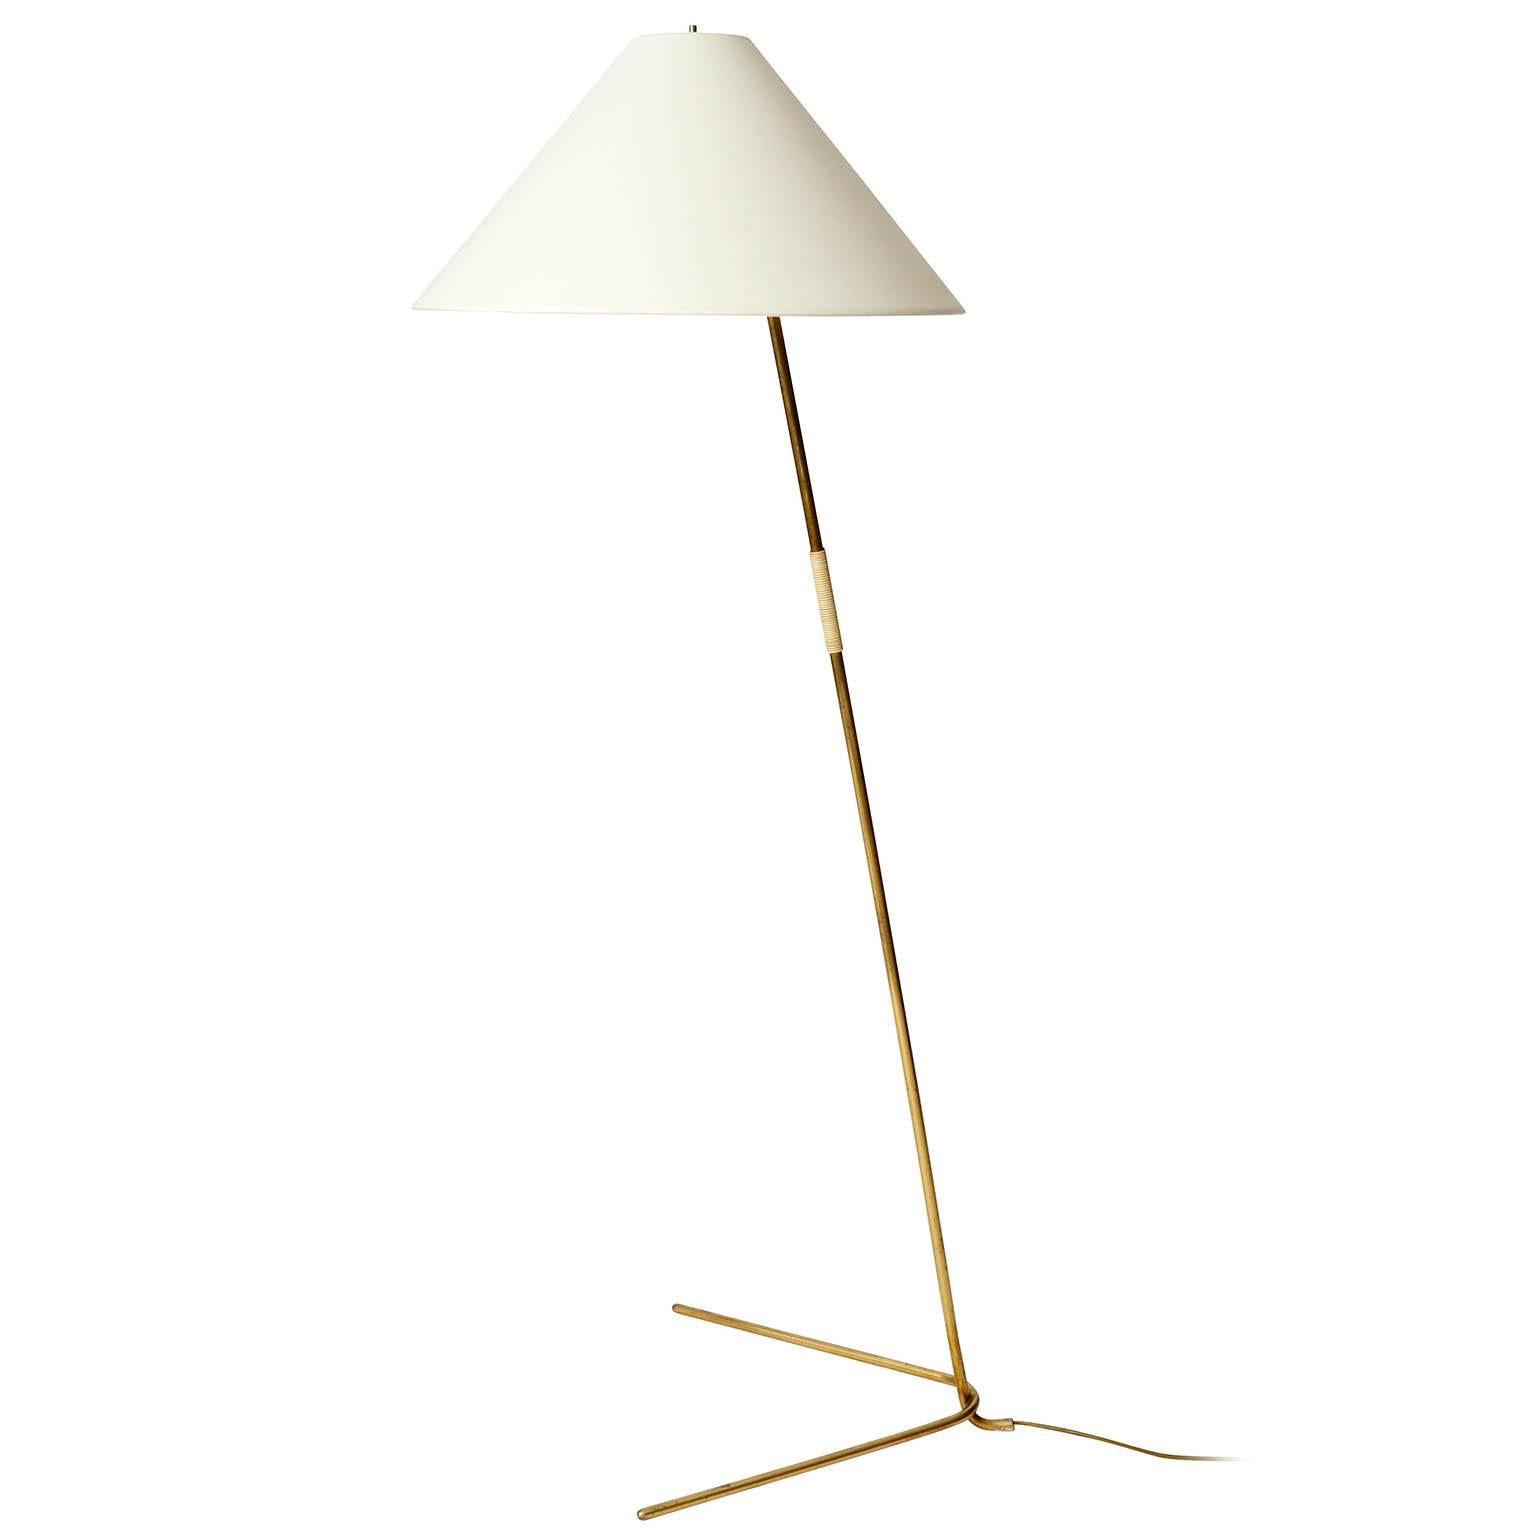 One of two beautiful brass floor lamps model 'Hase' / 'Rabbit' no.  by J.T. Kalmar, manufactured in Mid-Century, in 1950s or early 1960s. The lights are documented in the Kalmar catalogues from 1953 as well as from 1960.
The brass parts are in